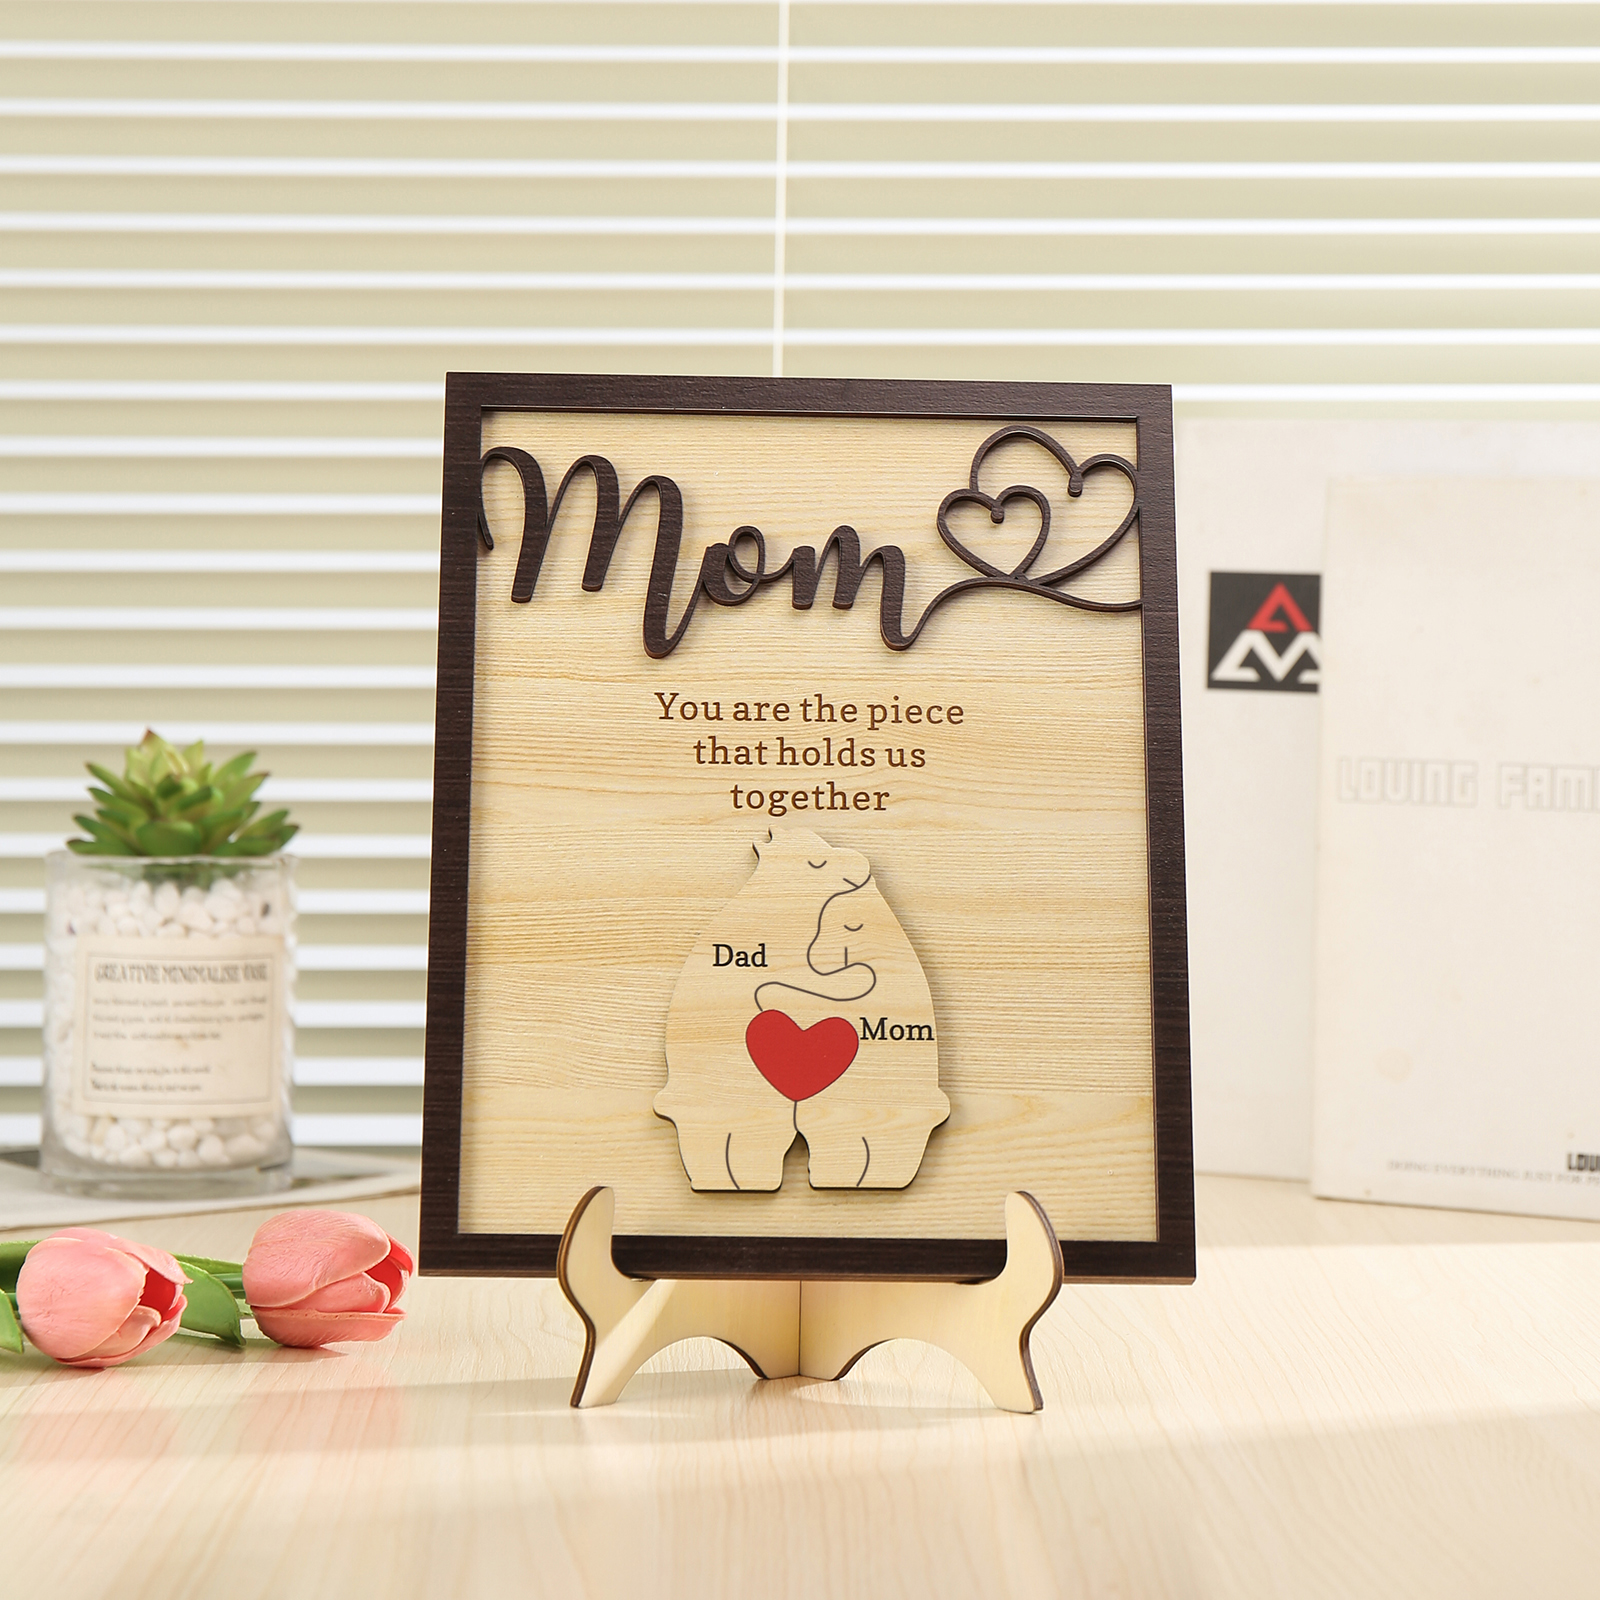 2 Names - Personalized Home Frame Wooden Ornaments Cute Bear Style Ornaments for Mom